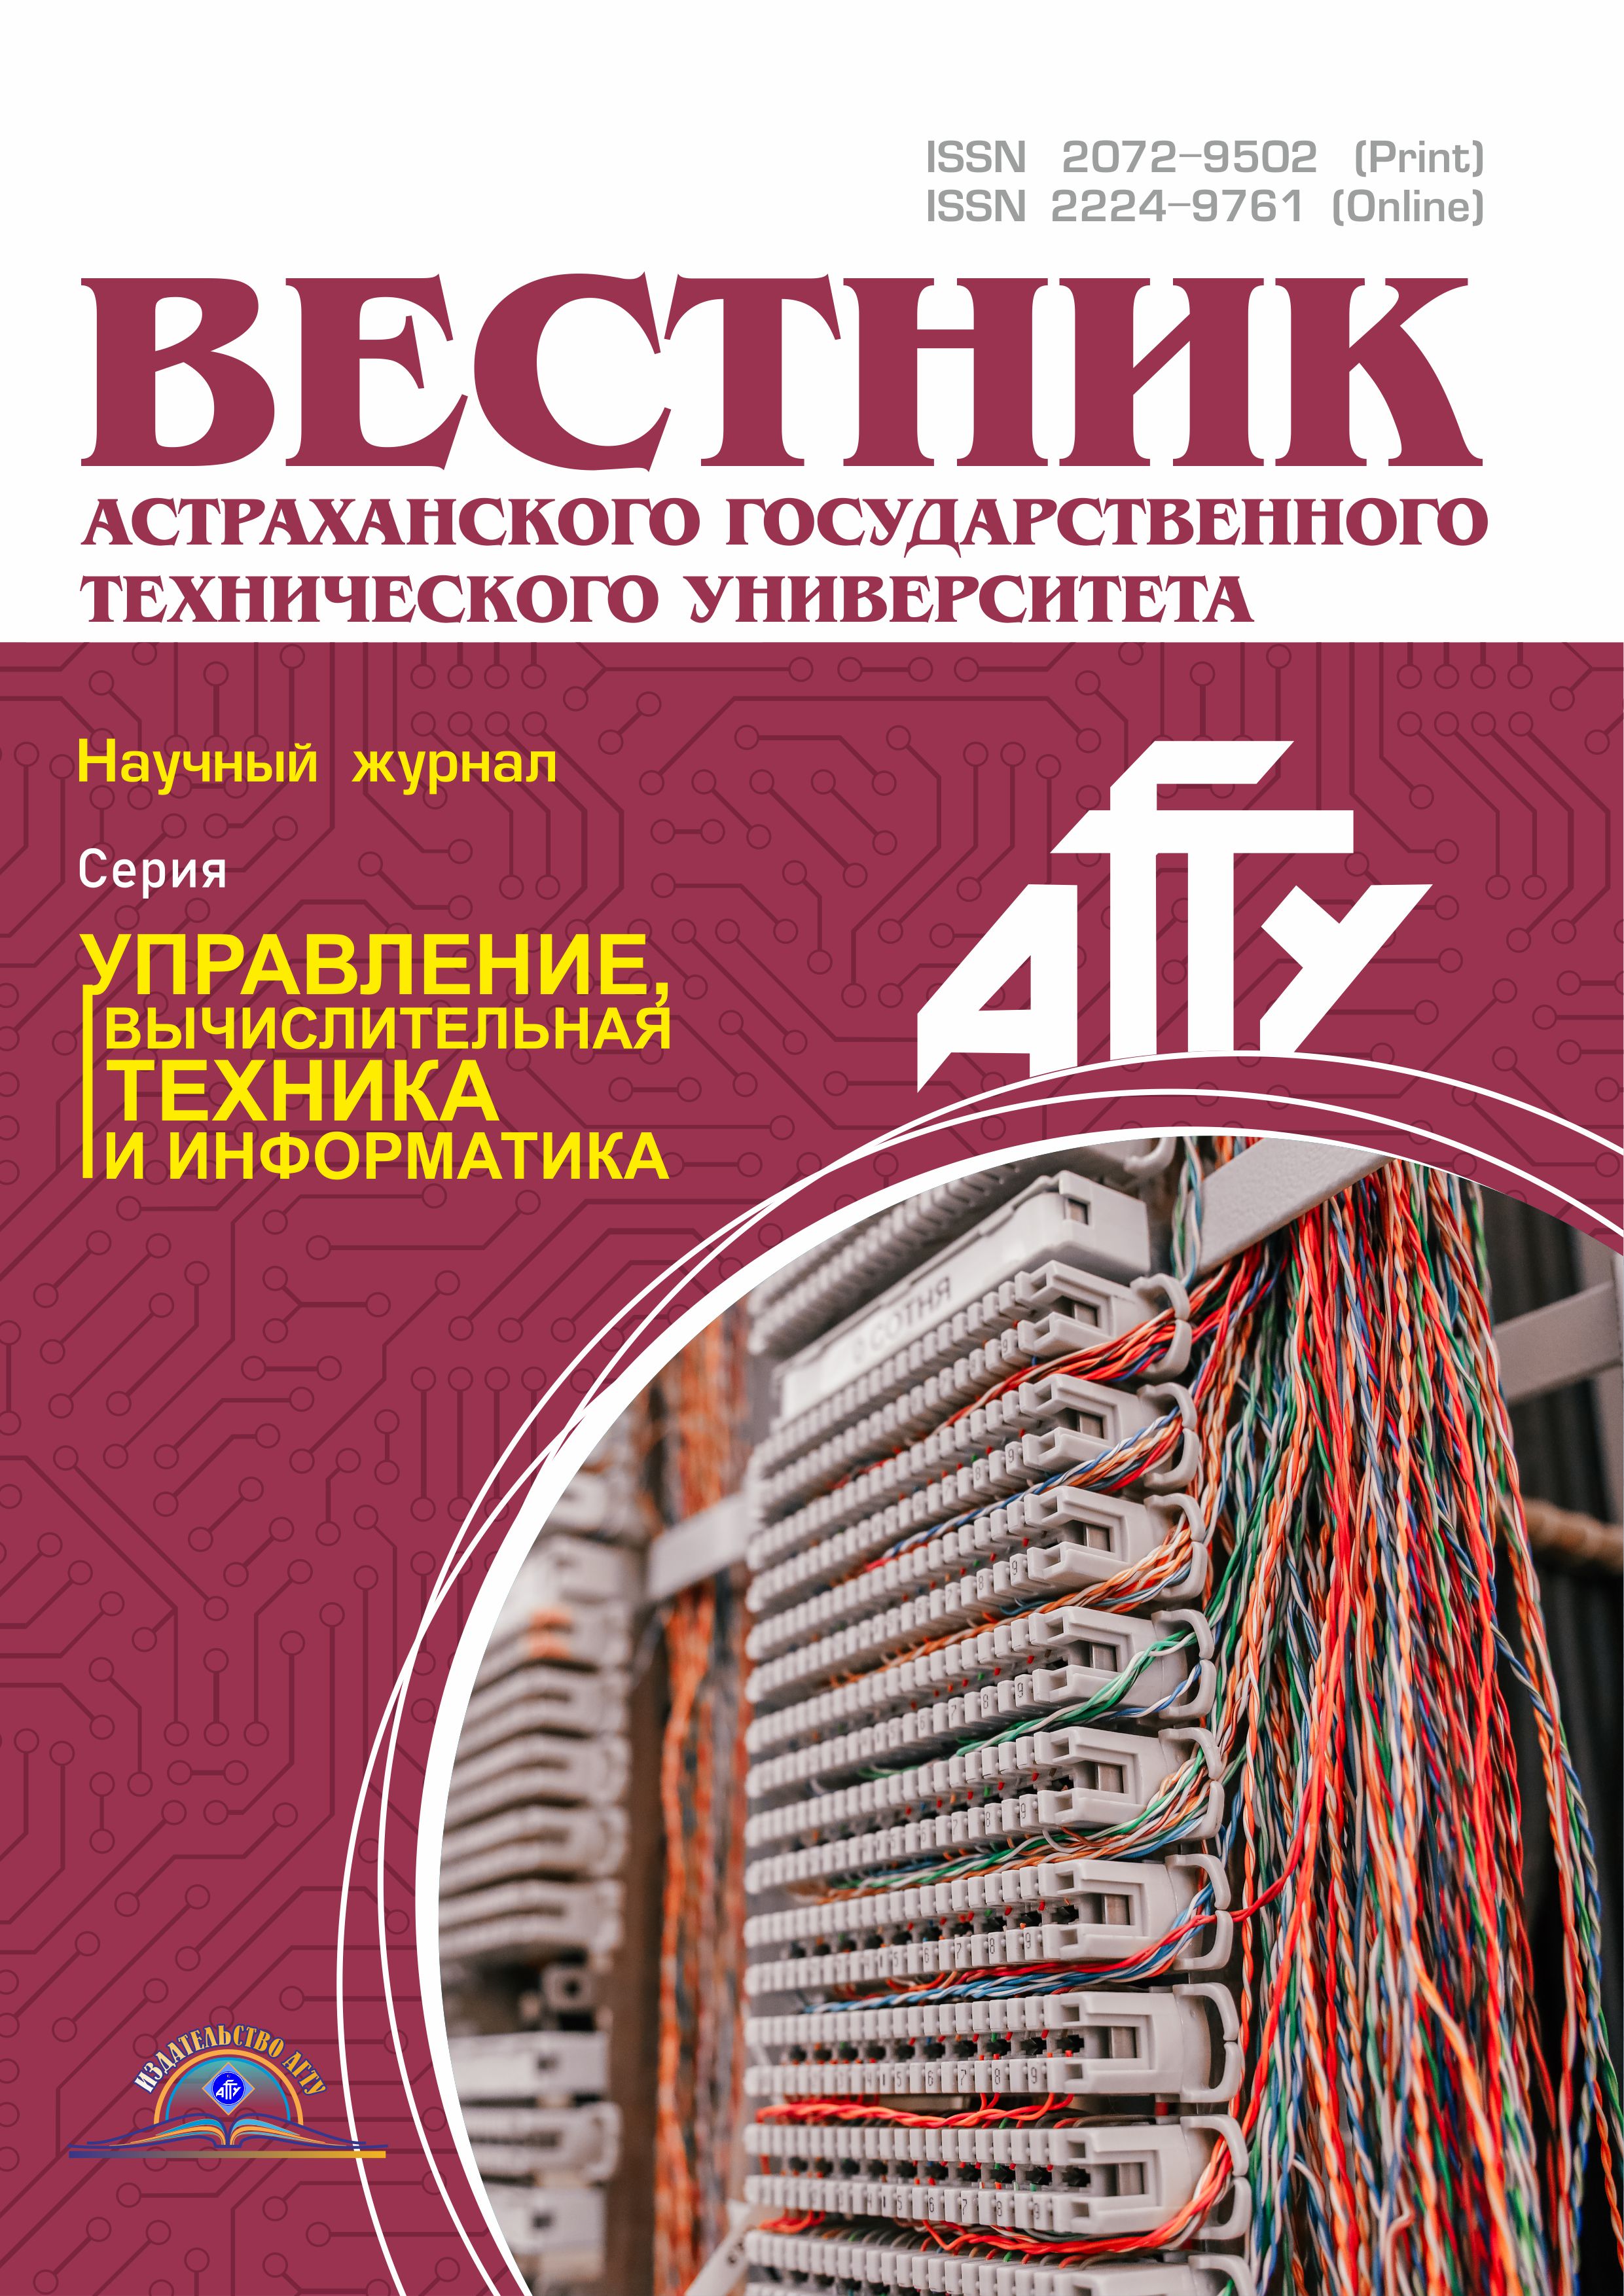                         INTELLECTUALIZATION OF THE INFORMATION SYSTEM FOR MONITORING THE FORMATION OF PROFESSIONAL COMPETENCE
            